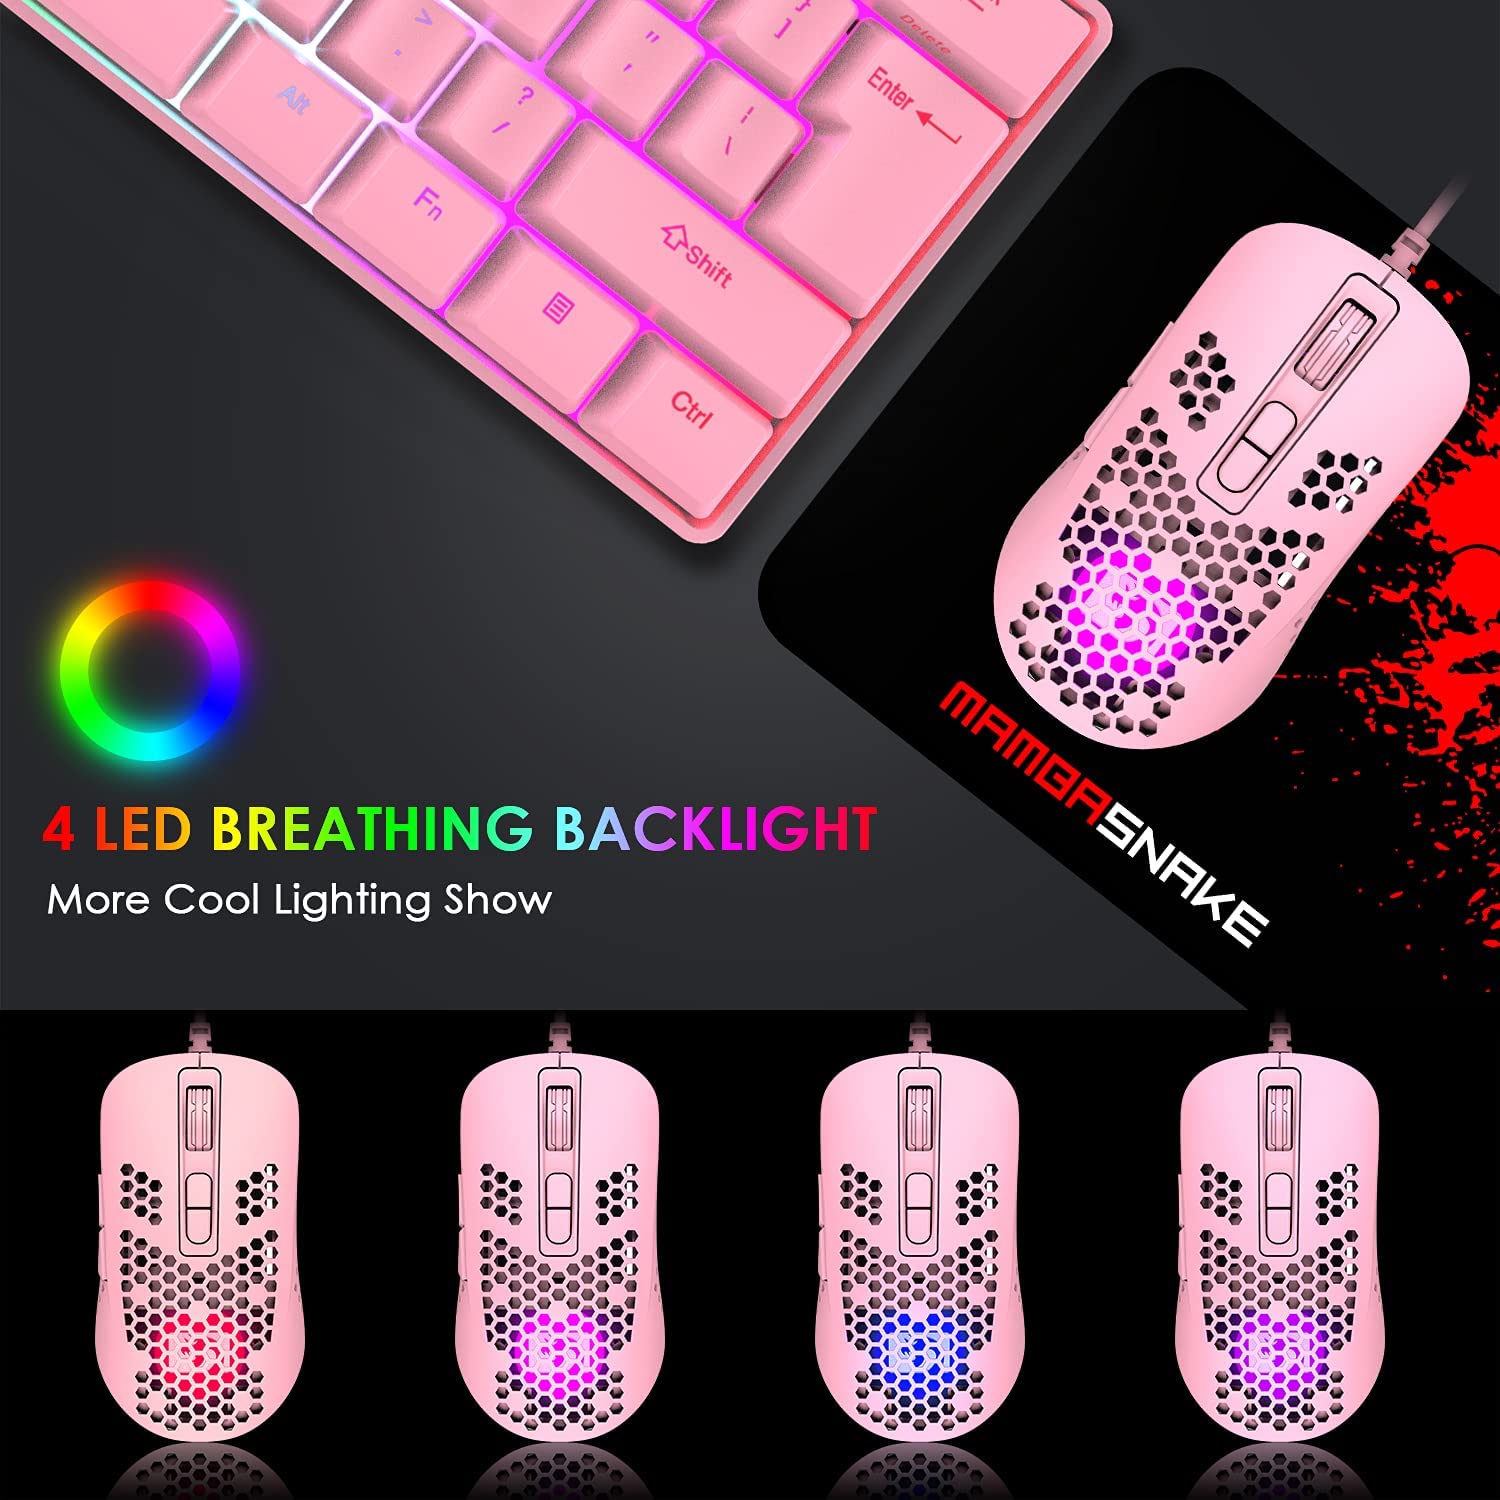  SOON GO Pink Mouse for Laptop Computer Mice with